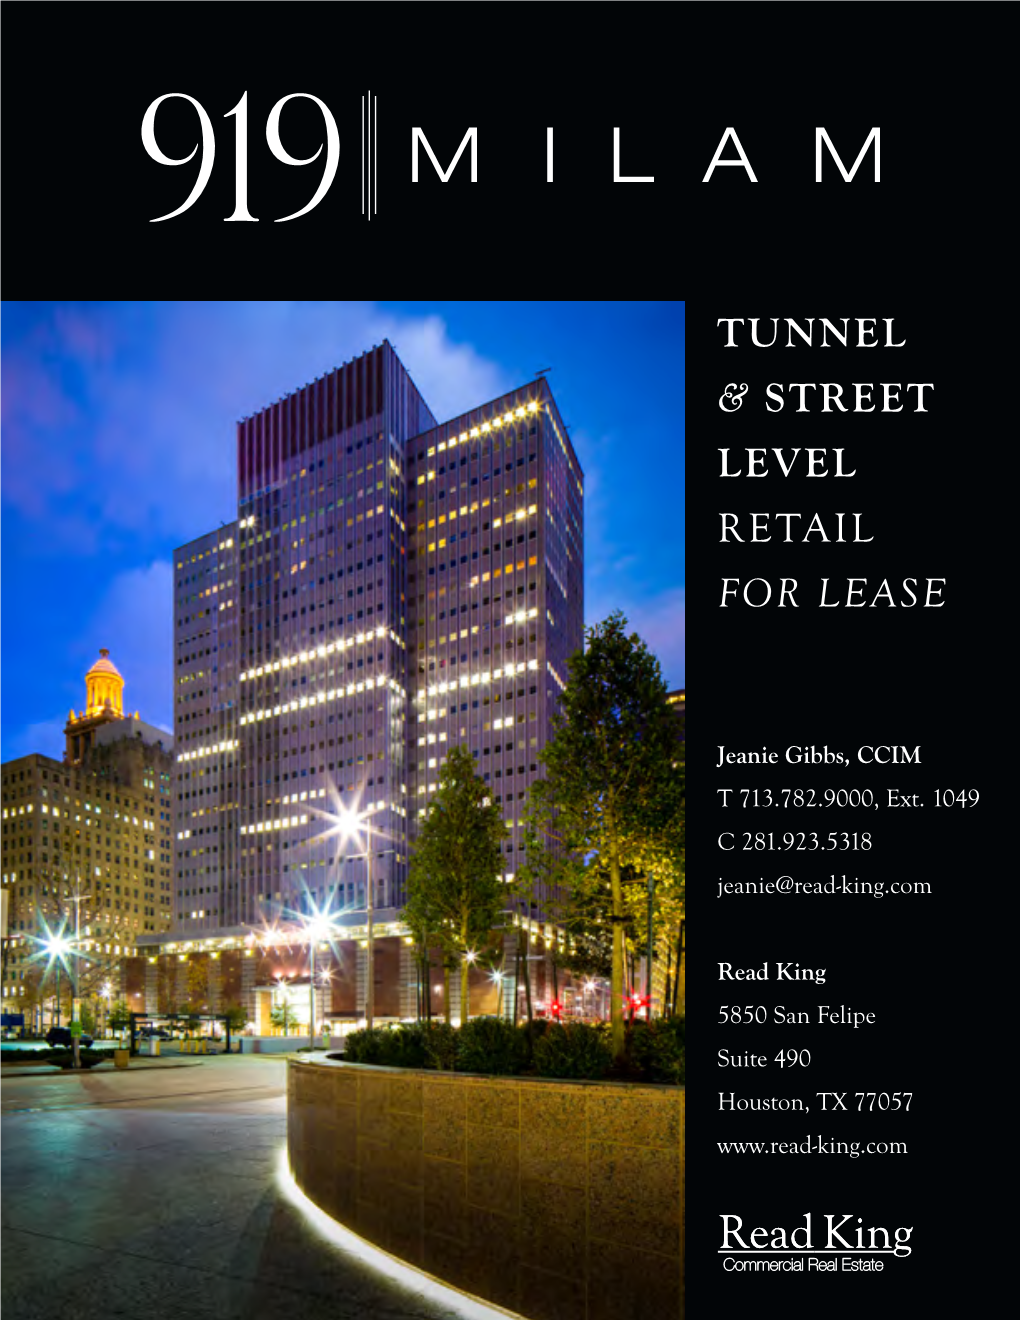 Tunnel & Street Level Retail for Lease